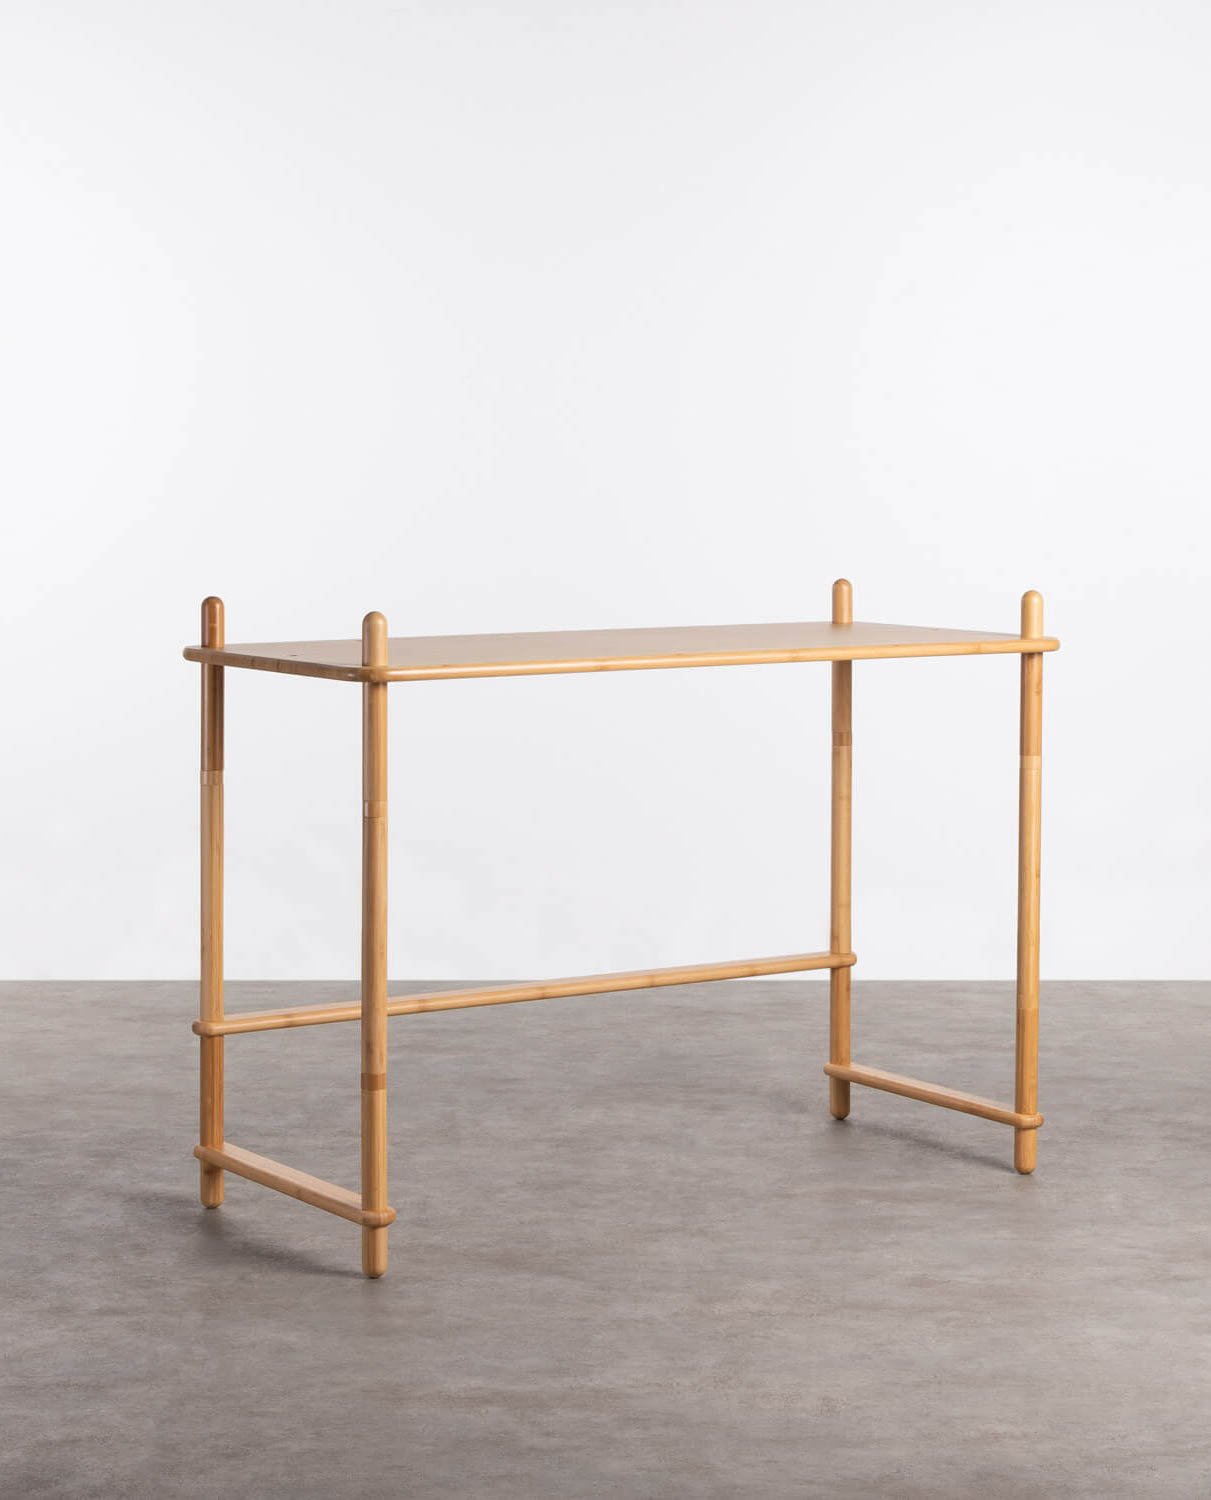 Bamboo Desk Piy, gallery image 1